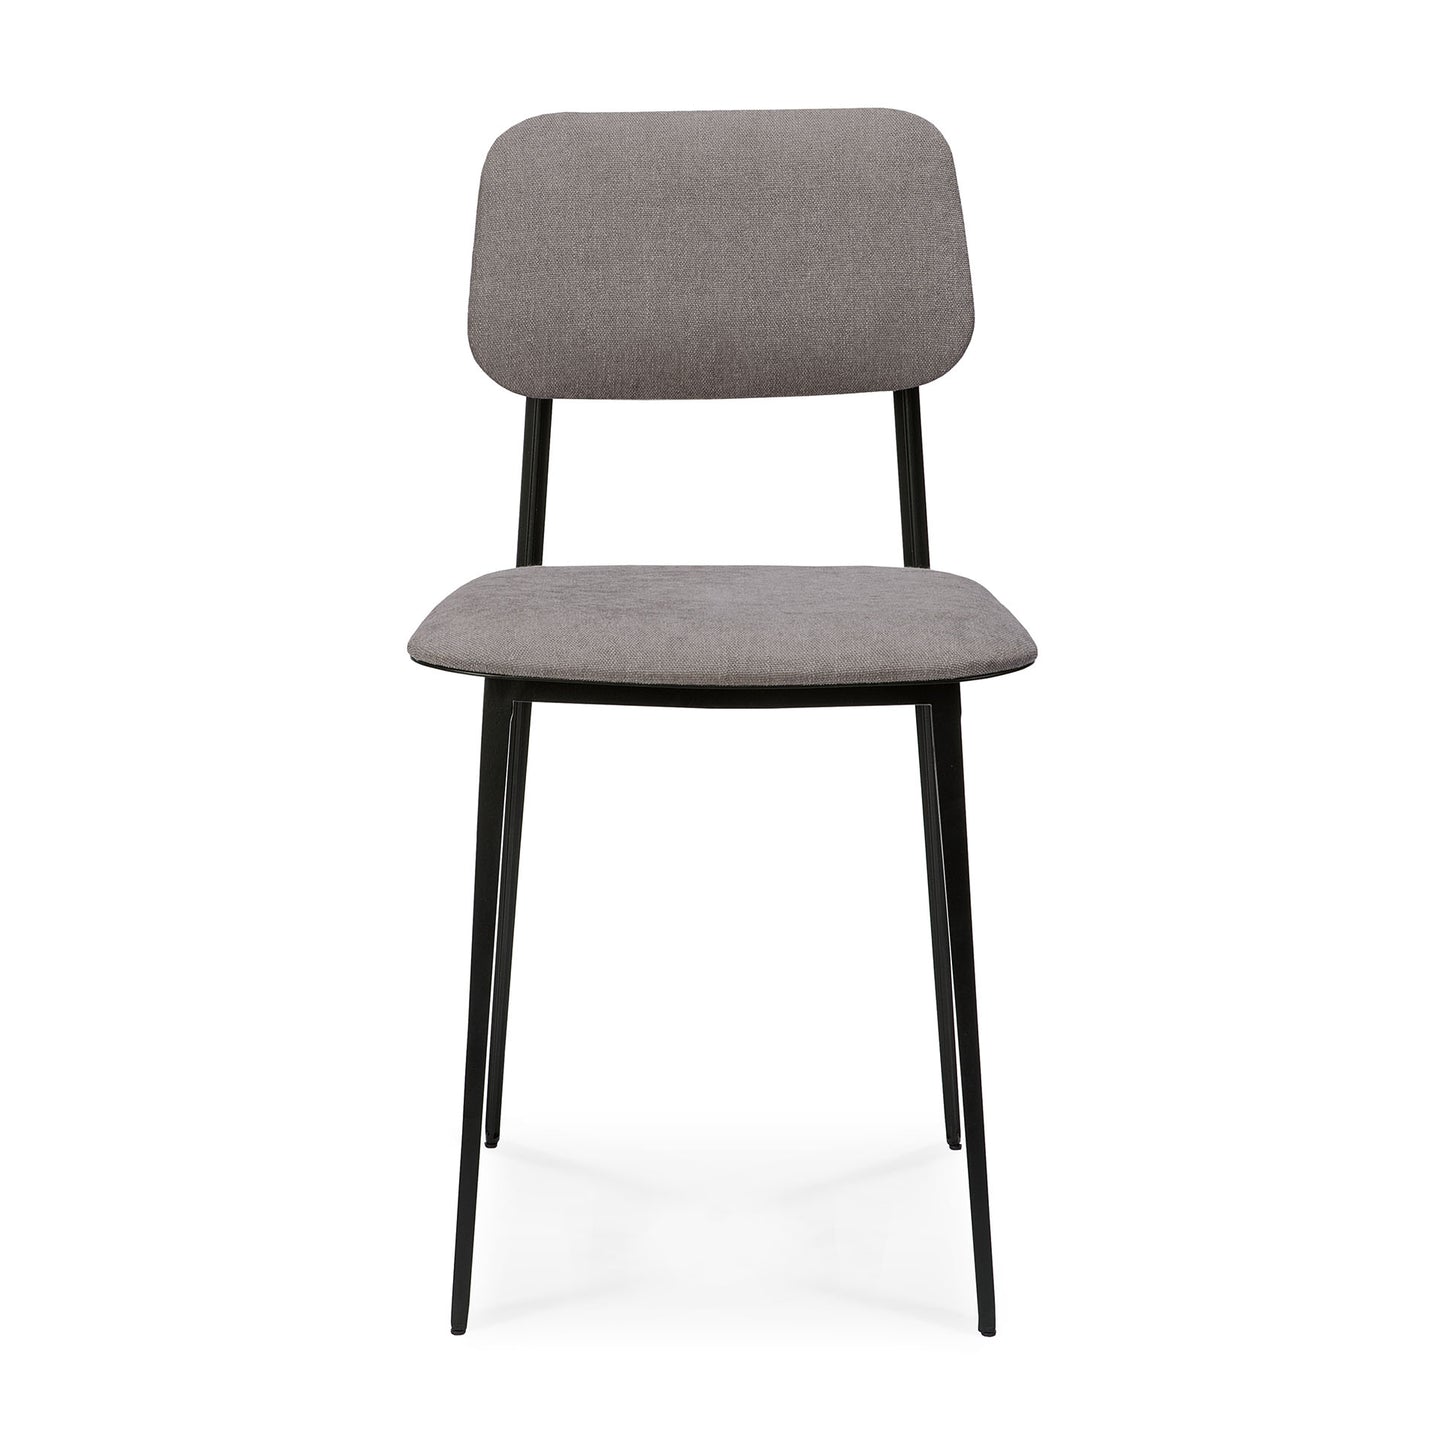 Load image into Gallery viewer, DC Dining Chair By Djordje Cukanovic | Light Grey
